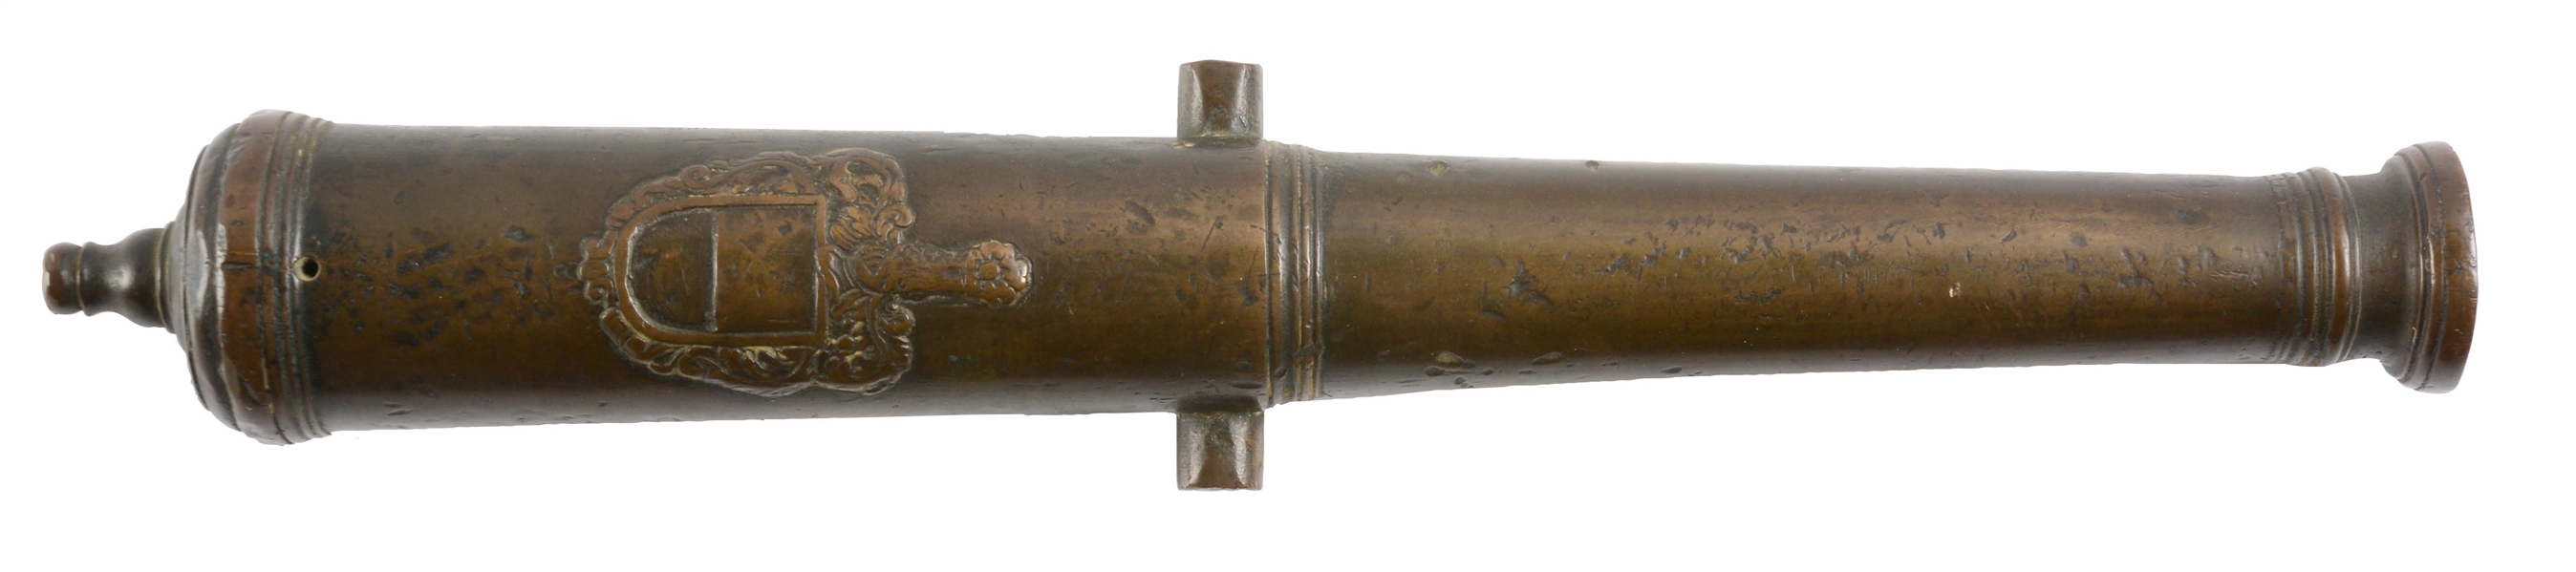 GOOD EARLY BRONZE CANNON MODEL, PROBABLY EARLY 18TH CENTURY. 